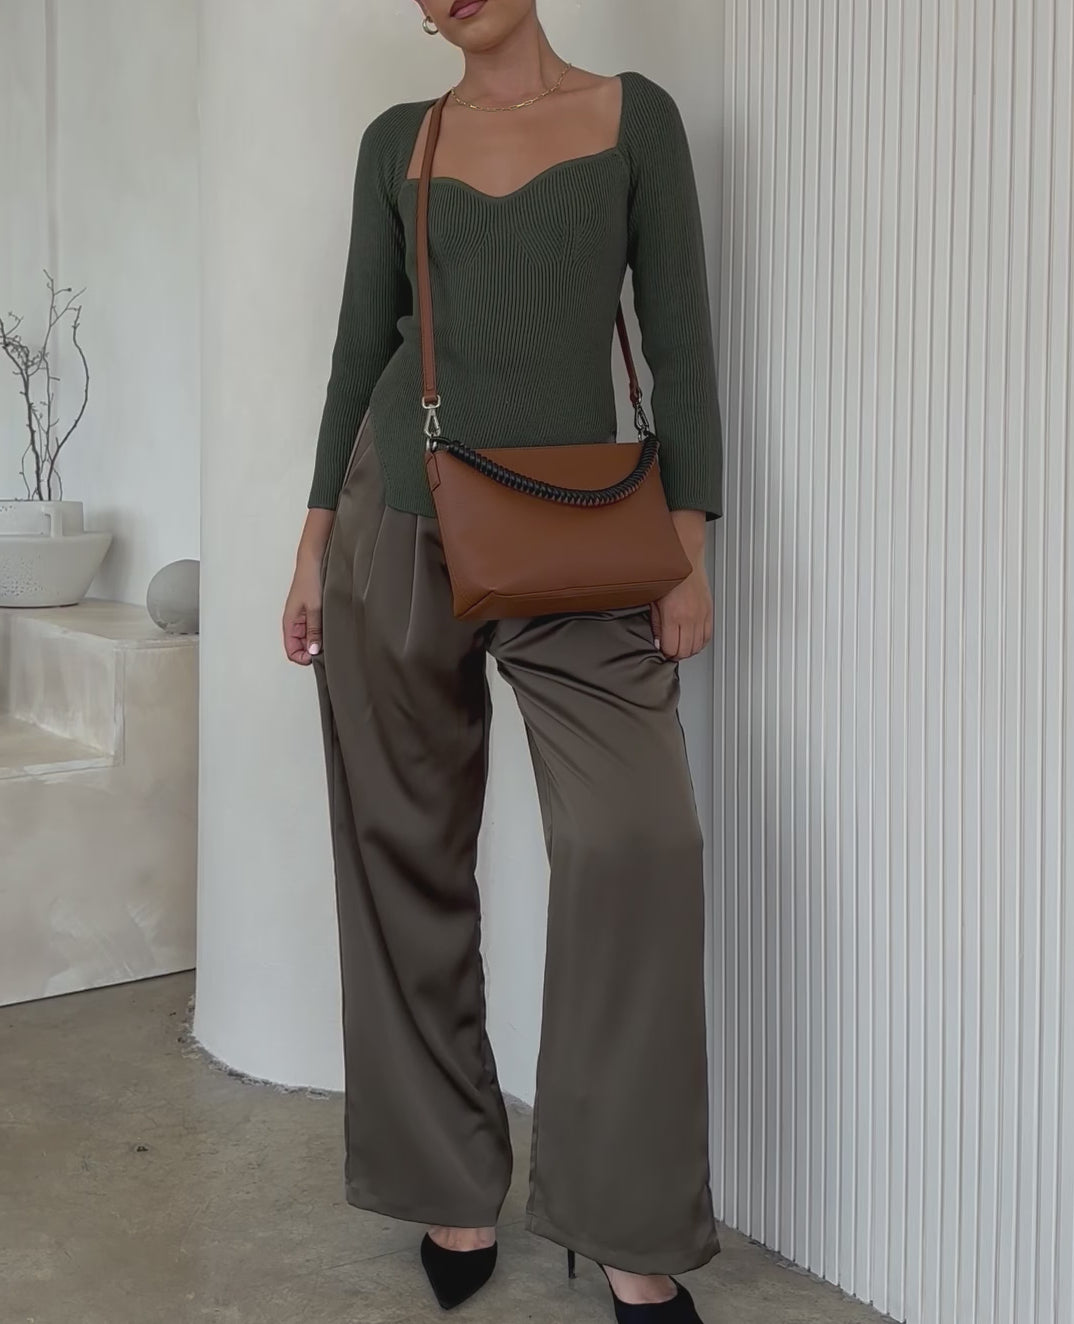 Video of a model wearing a saddle recycled vegan leather crossbody handbag against a white wall. 